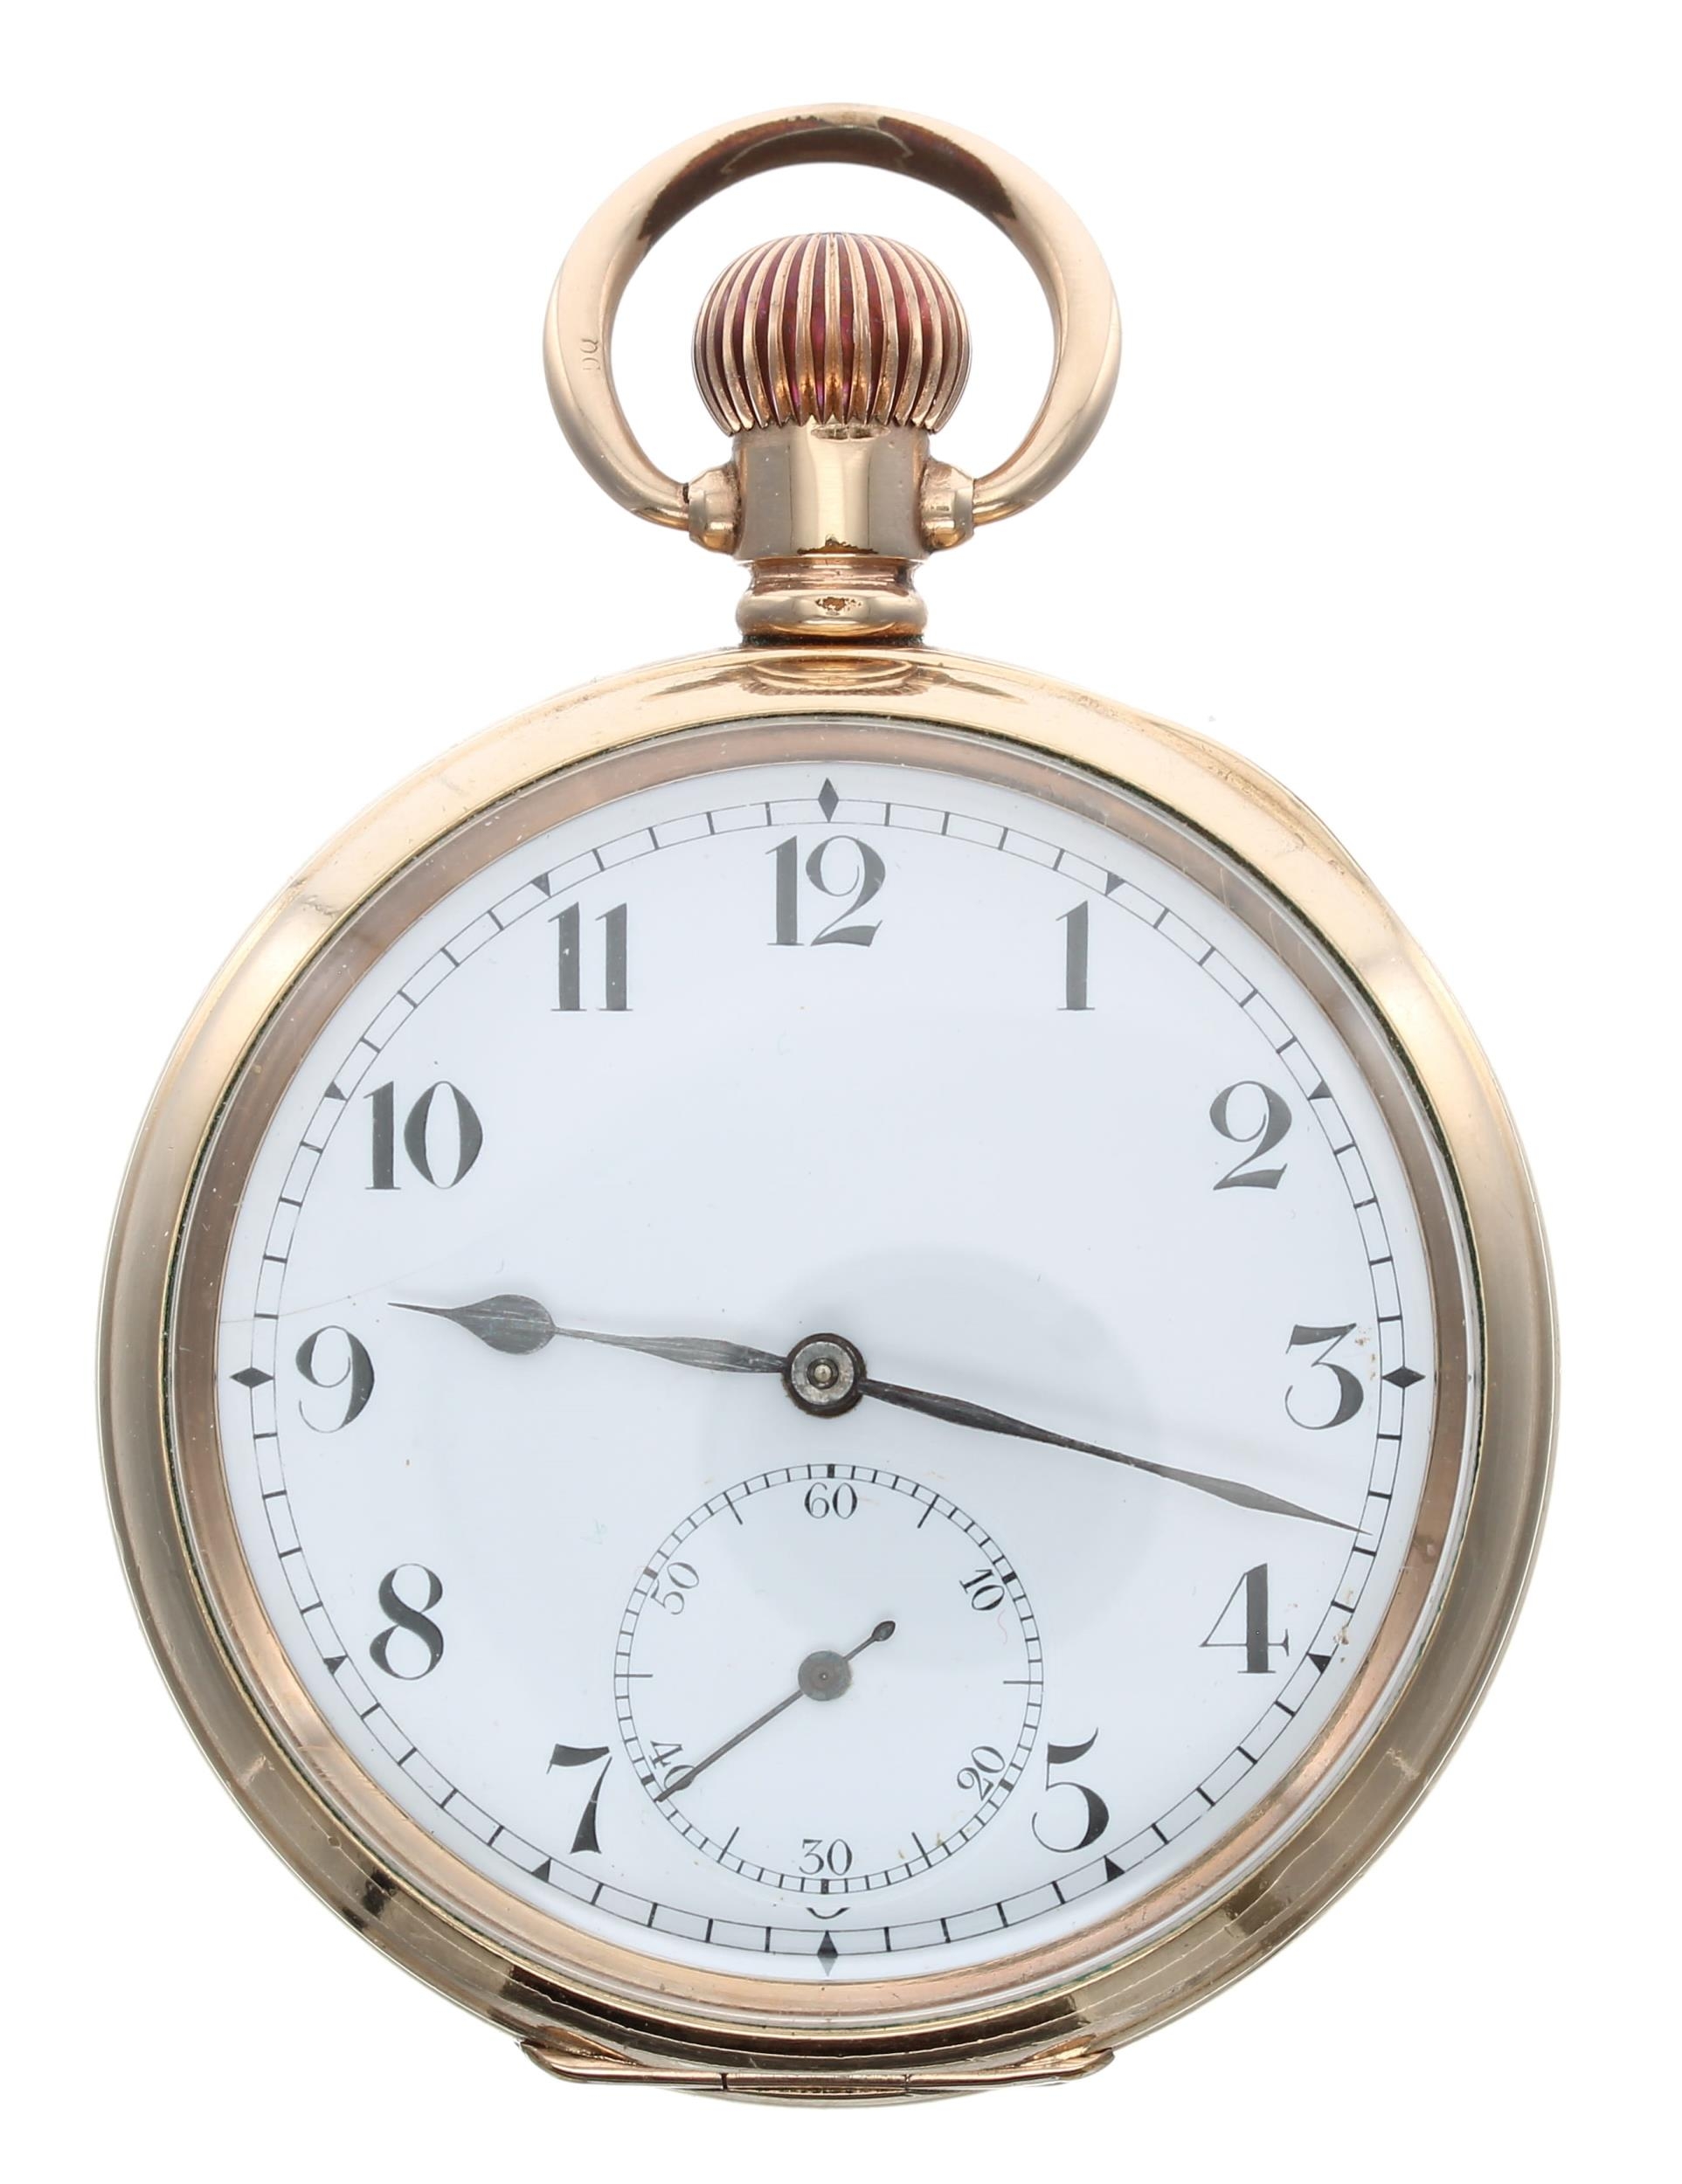 Gold plated lever pocket watch, 17 jewel adjusted movement, no. 141517, Arabic dial with minute